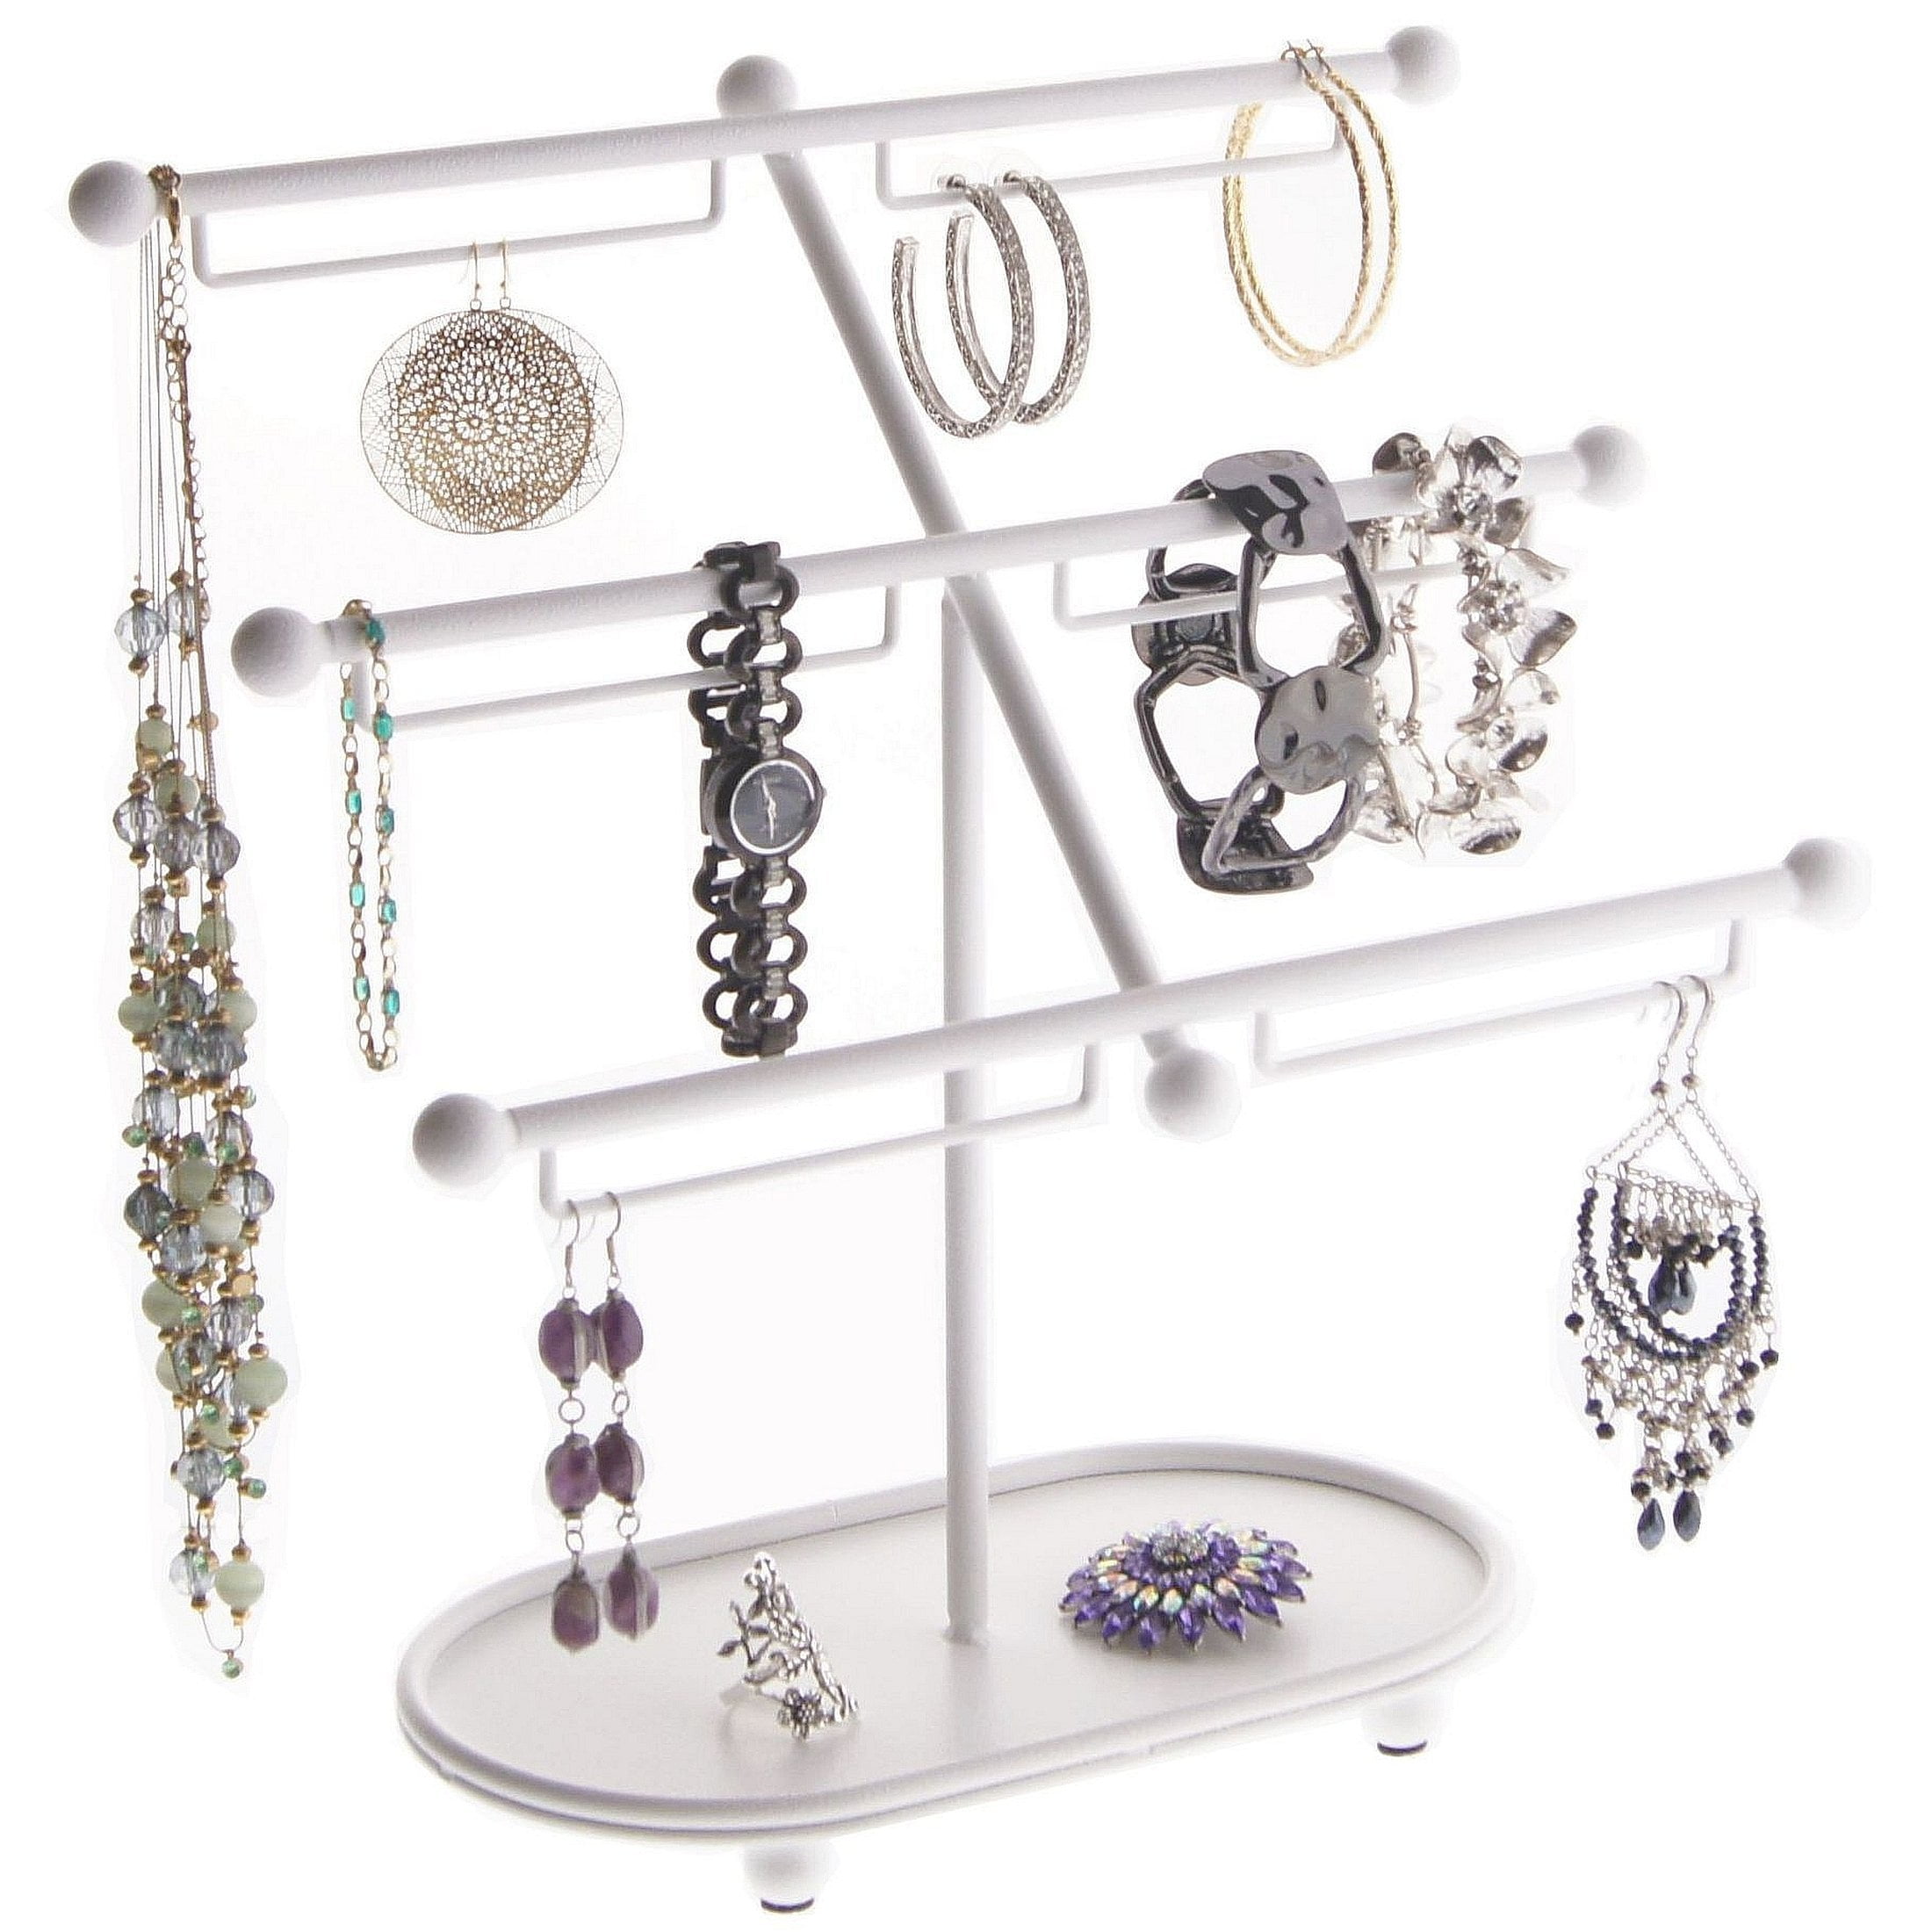 Details about   Hanging Wall Mount Photo Display Jewelry Earring Organizer Holder Stand Rack Box 